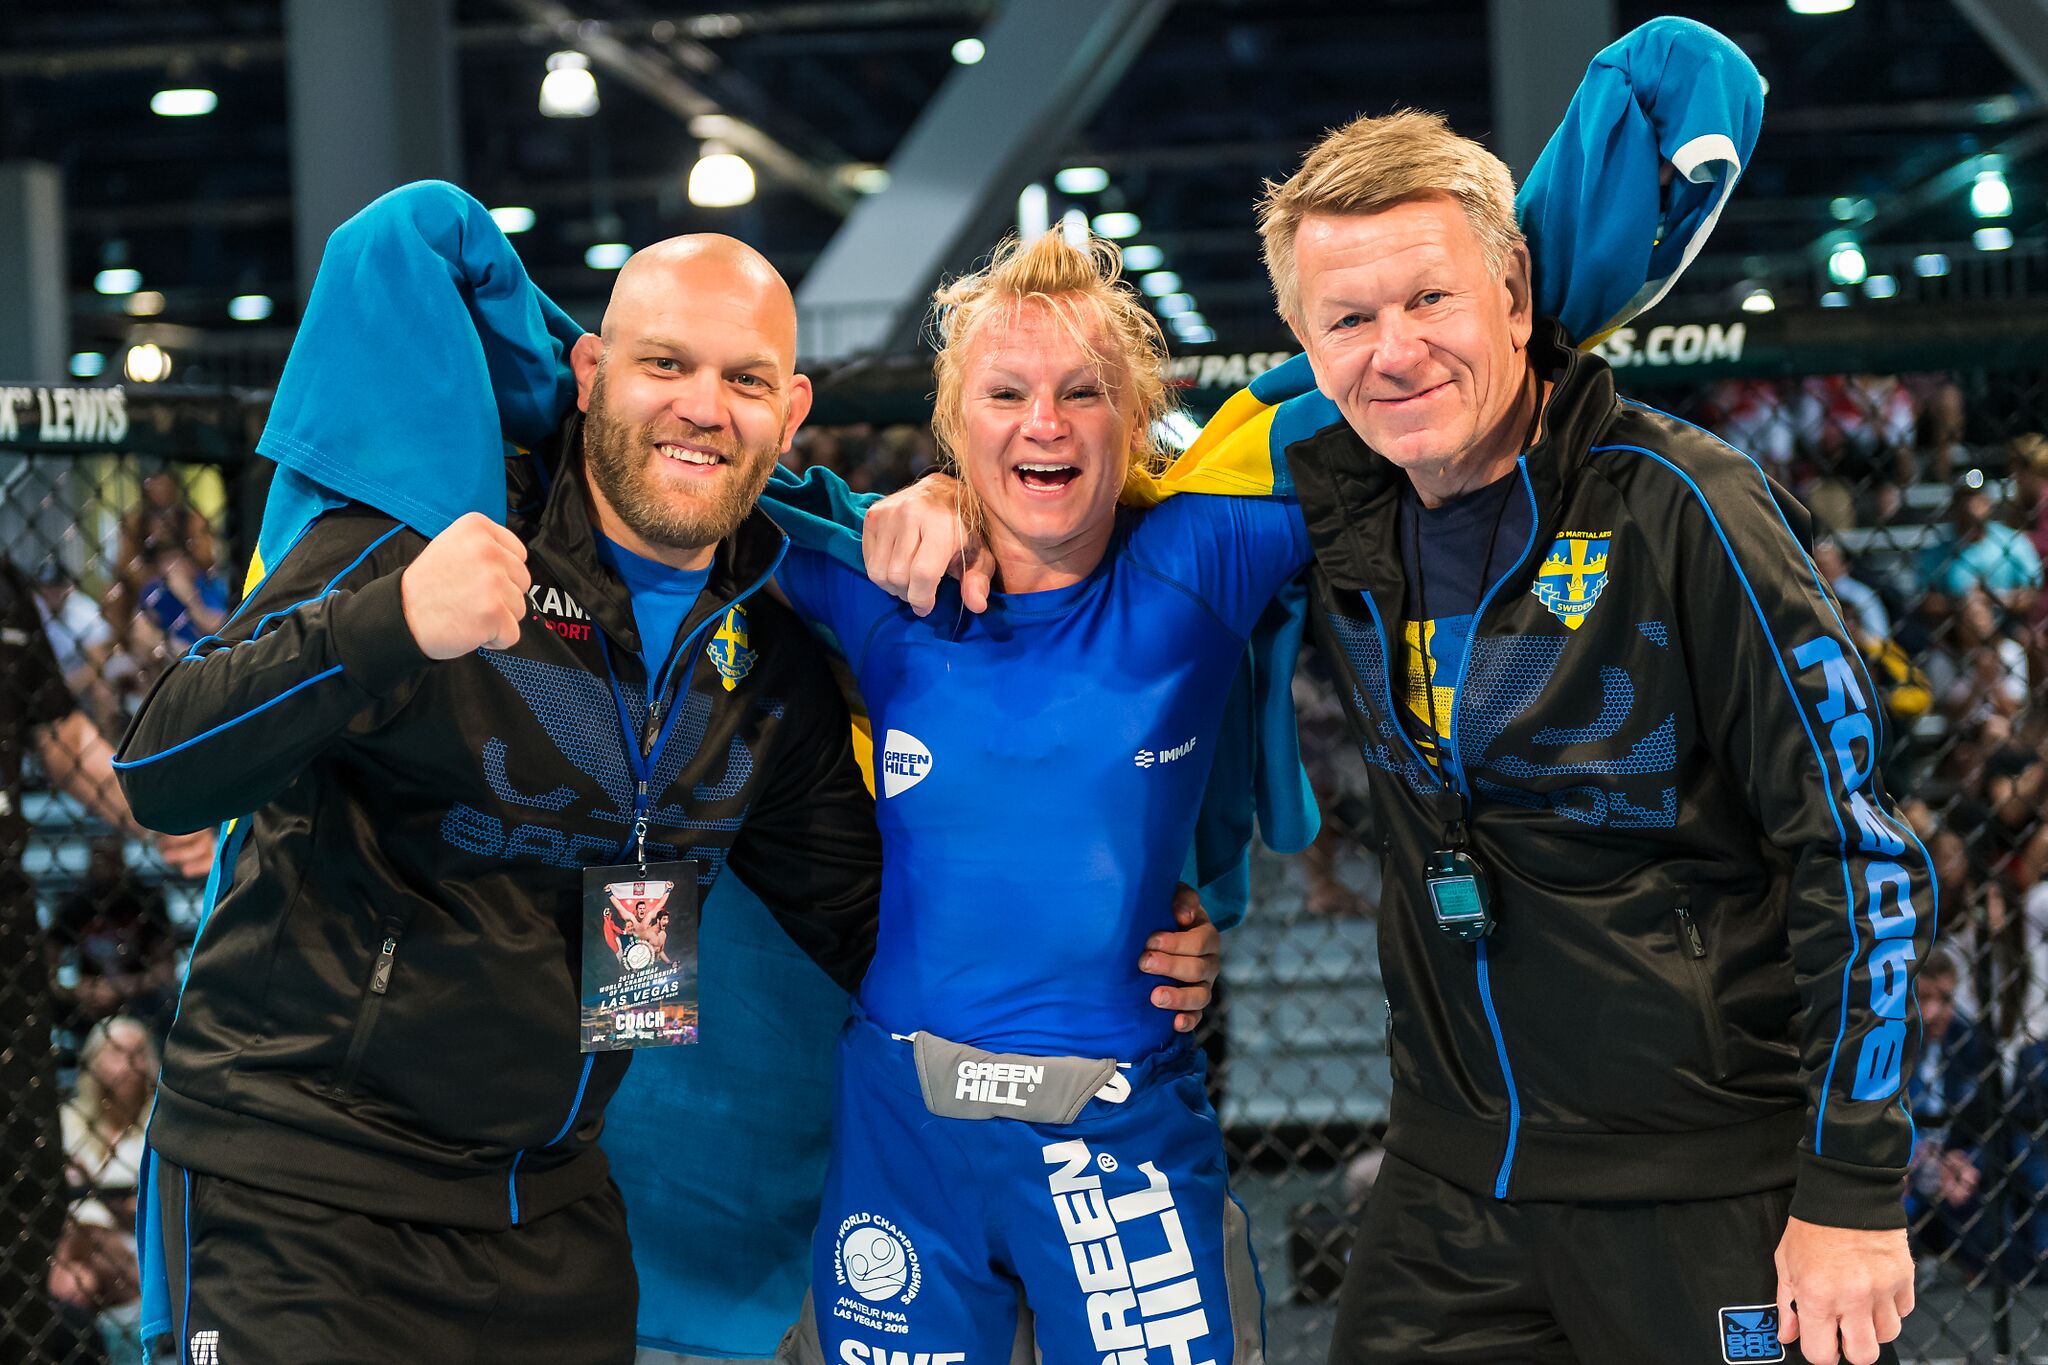 NATIONAL TEAMS & ATHLETES FOR 2016 IMMAF EUROPEAN OPEN